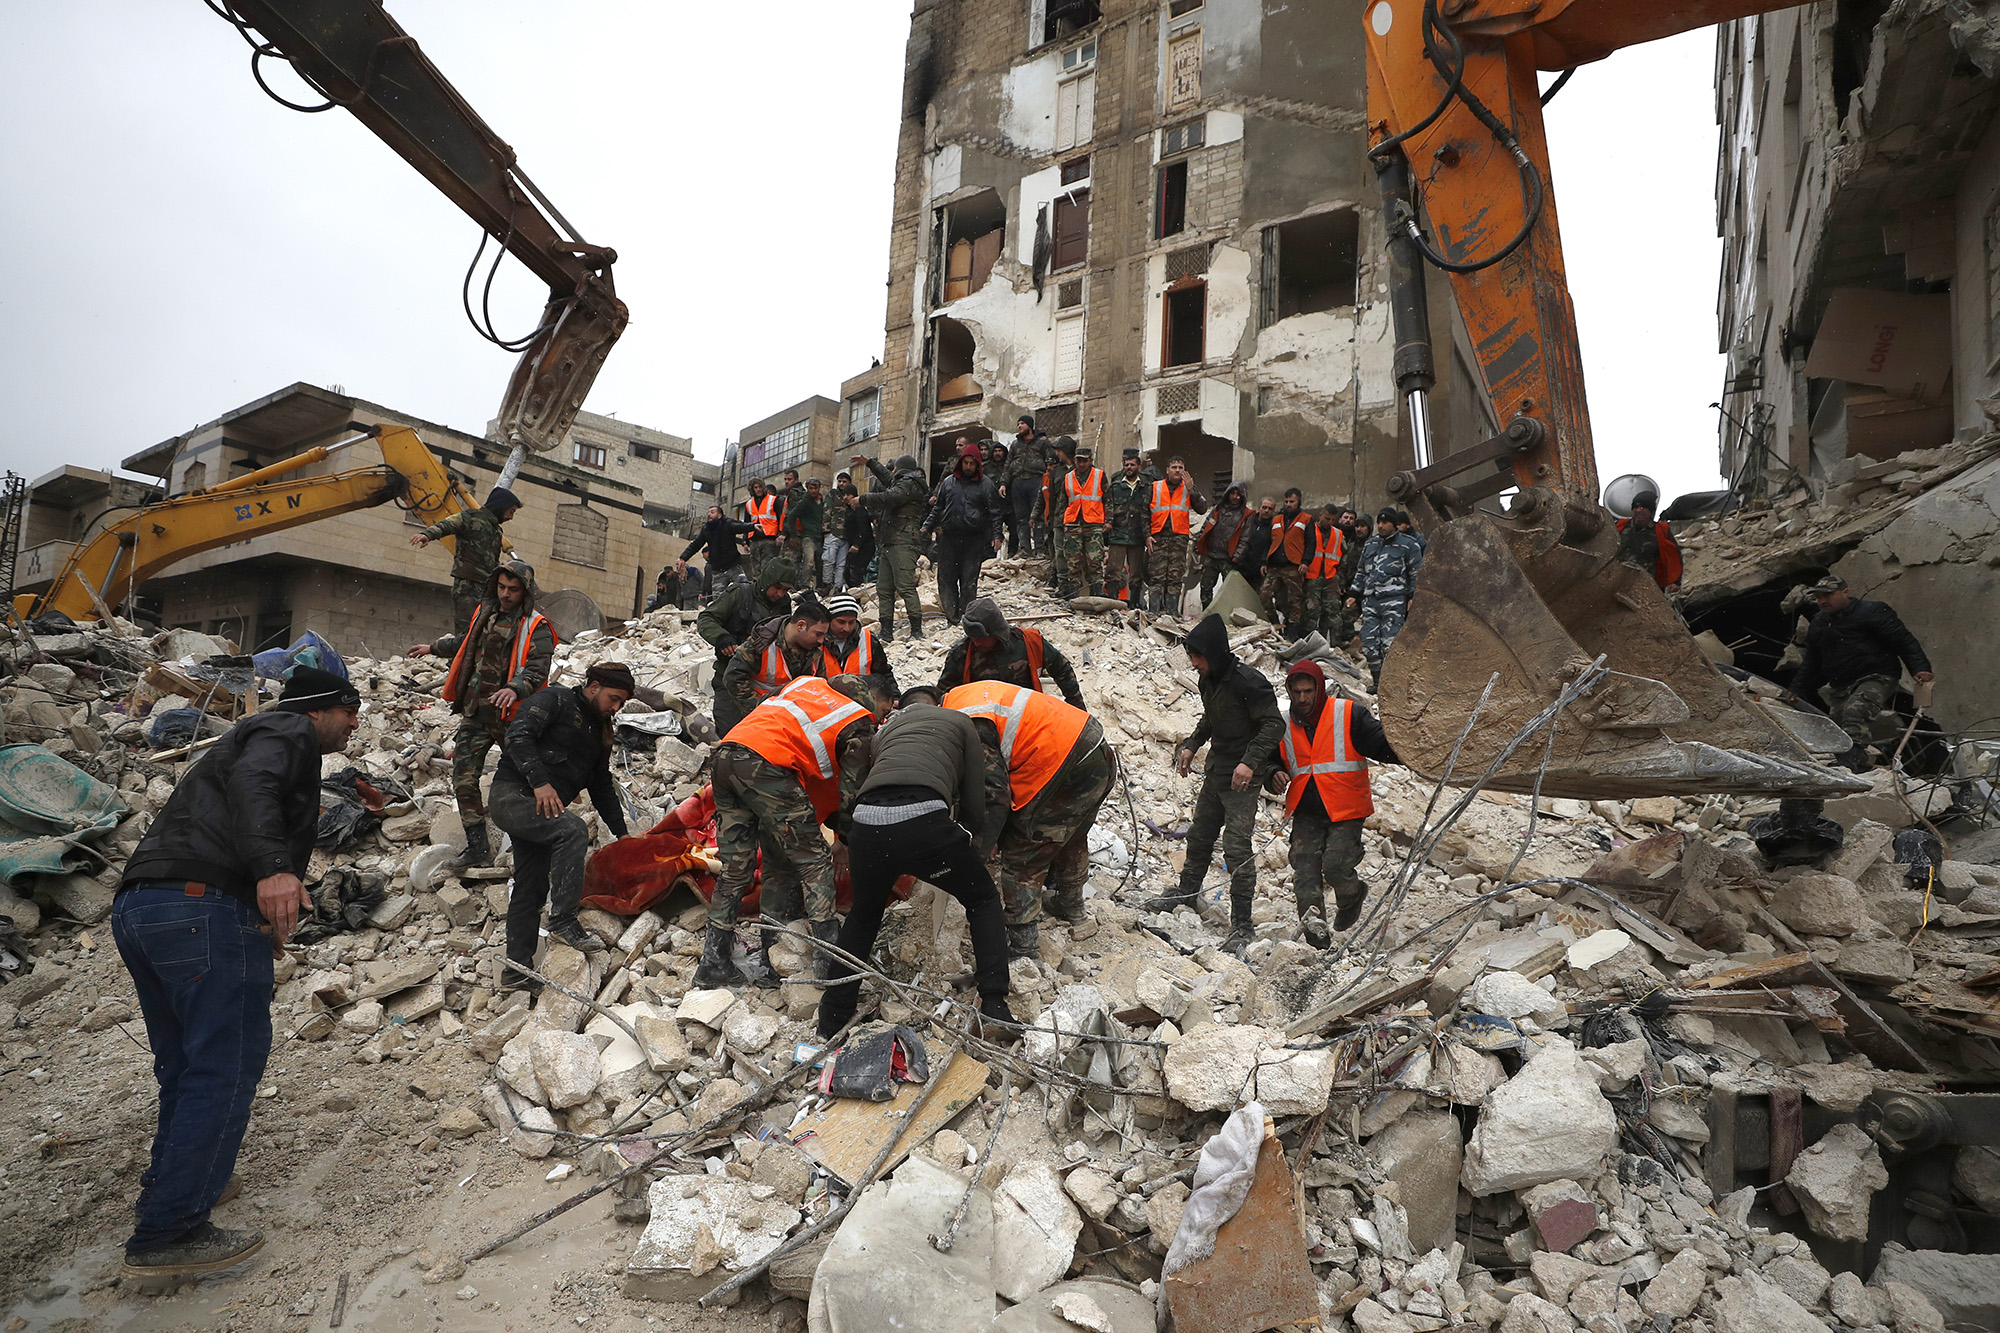 Civil defense workers and security forces search through the wreckage of collapsed buildings in Hama, Syria.